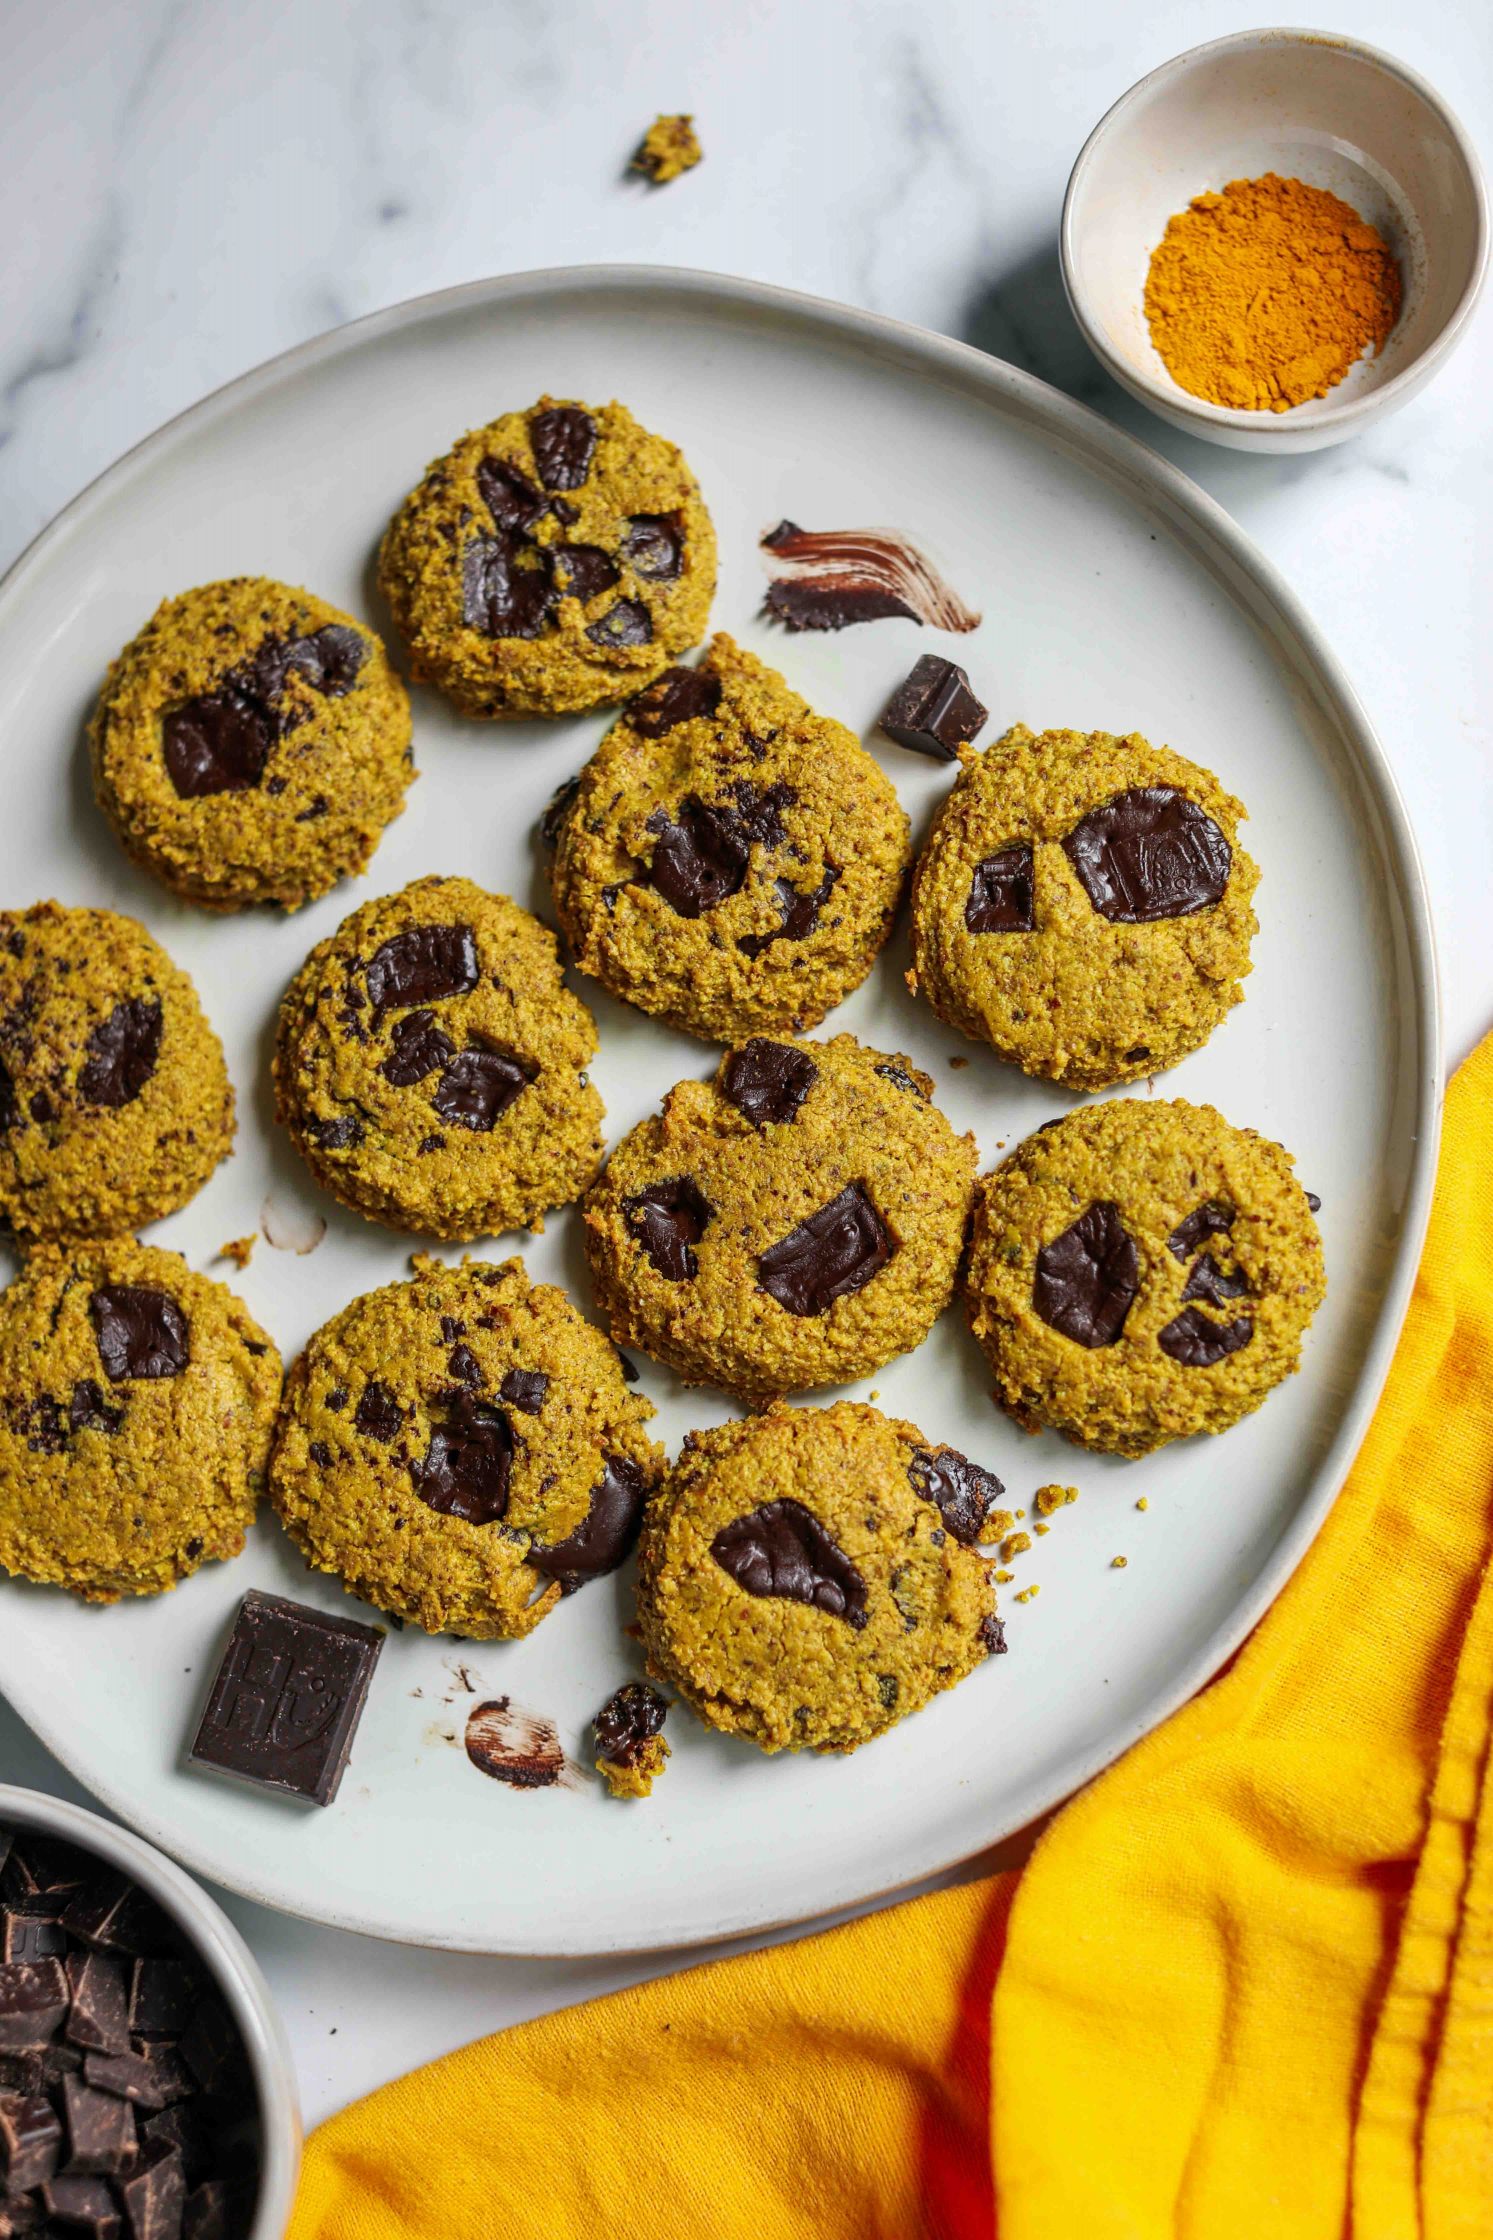 Turmeric Dark Chocolate Chunk Cookies served on a plate with a yellow towel and a side of ground turmeric and dark chocolate chunks by Flora & Vino